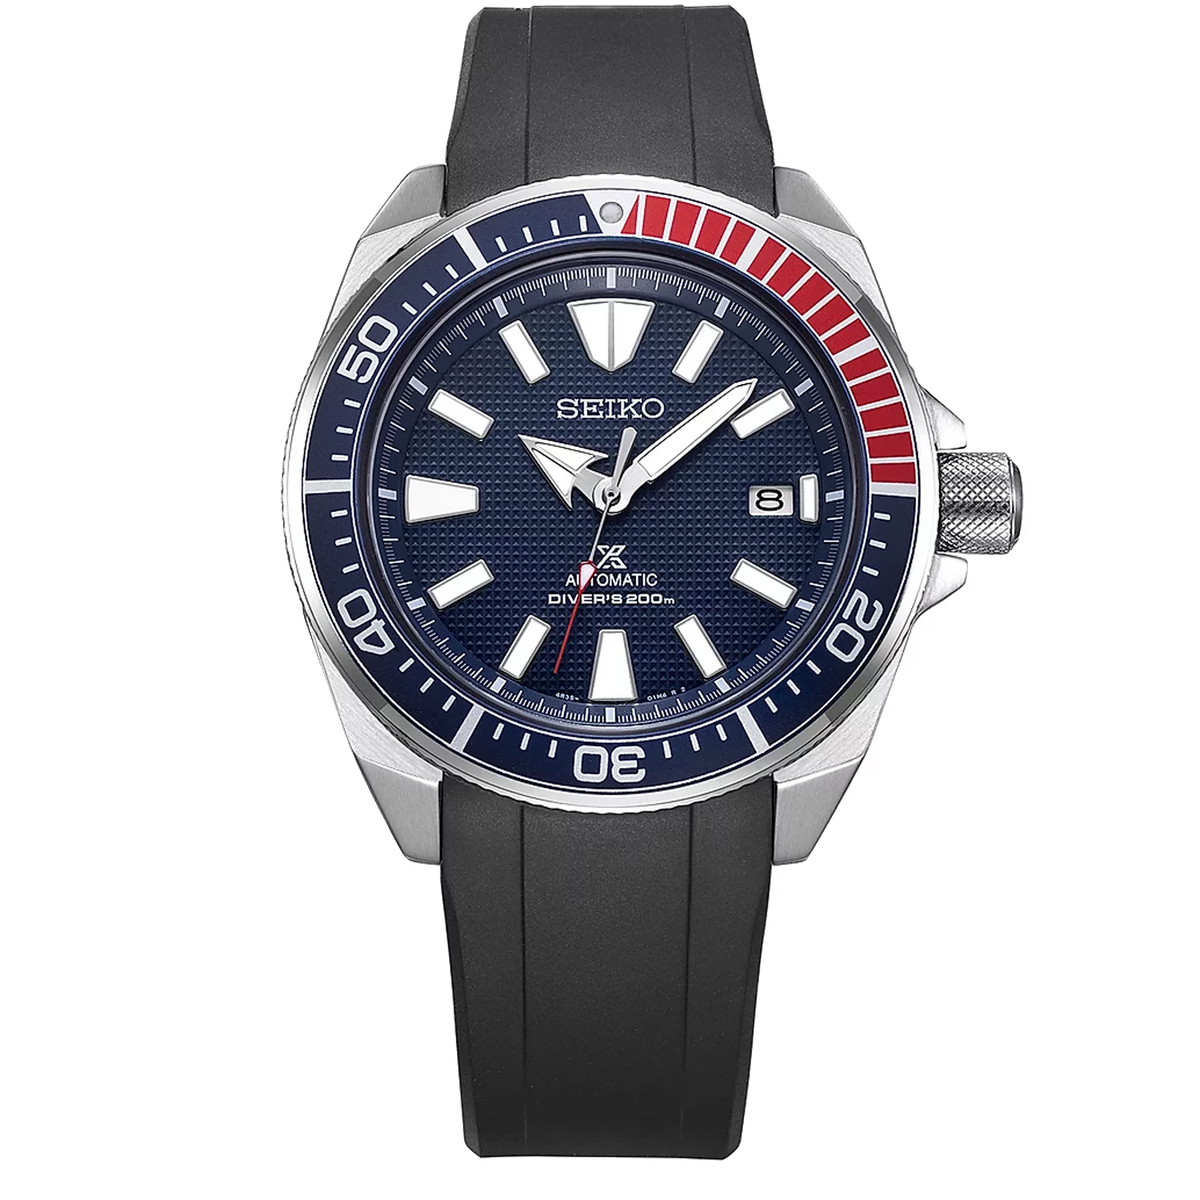 Crafter Blue - Fitted End Rubber Strap for Seiko Samurai